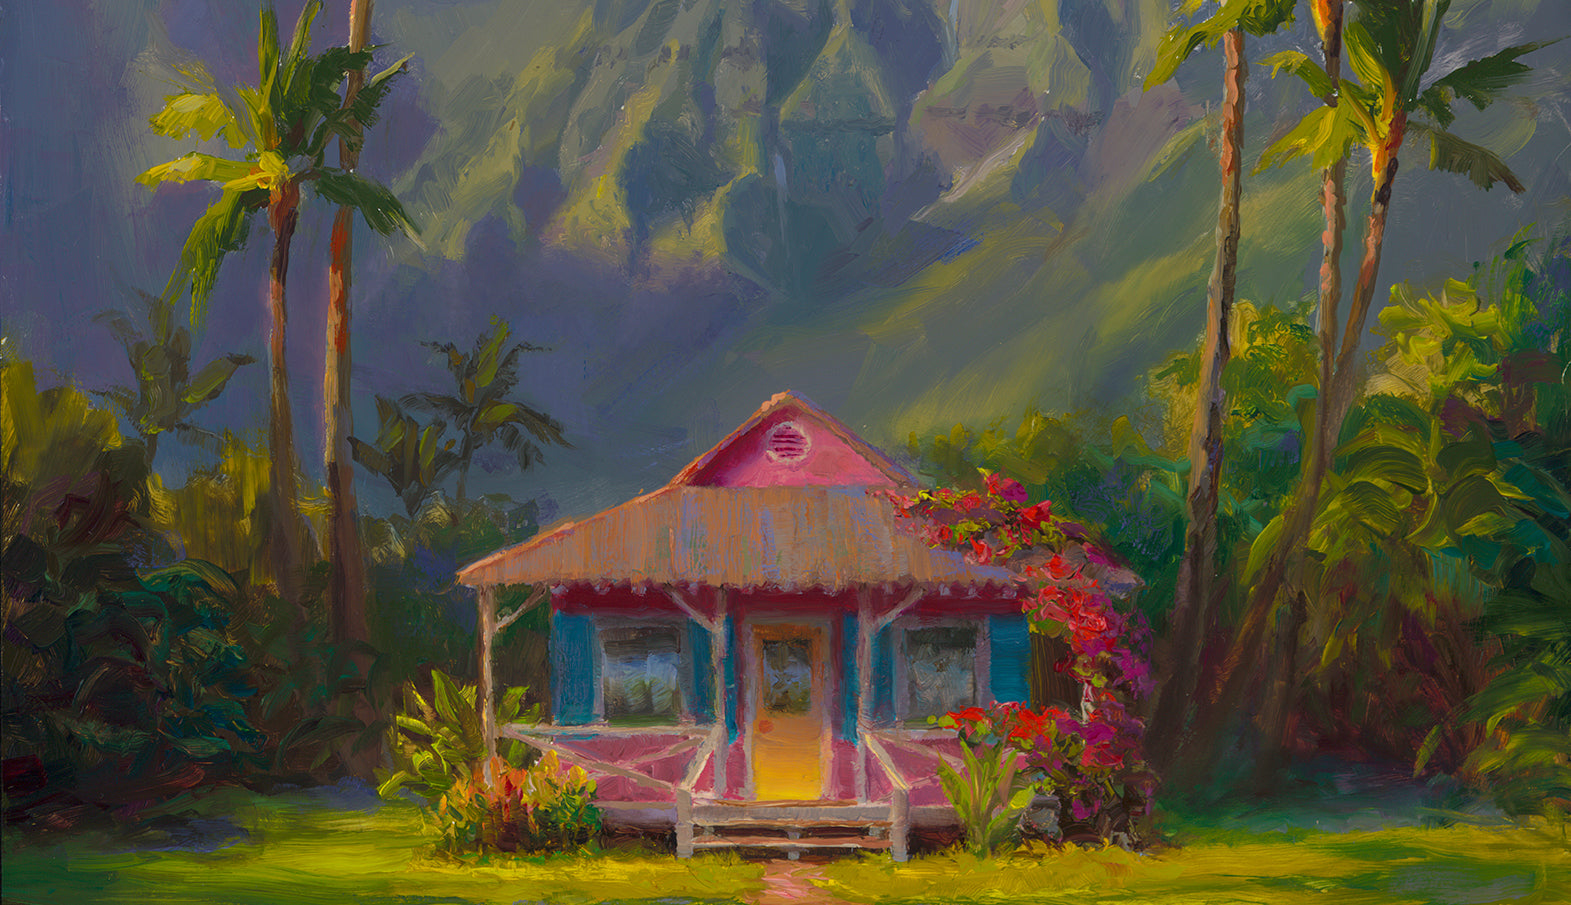 Painting of Hanalei Cottage and palm trees, Hawaiian landscape